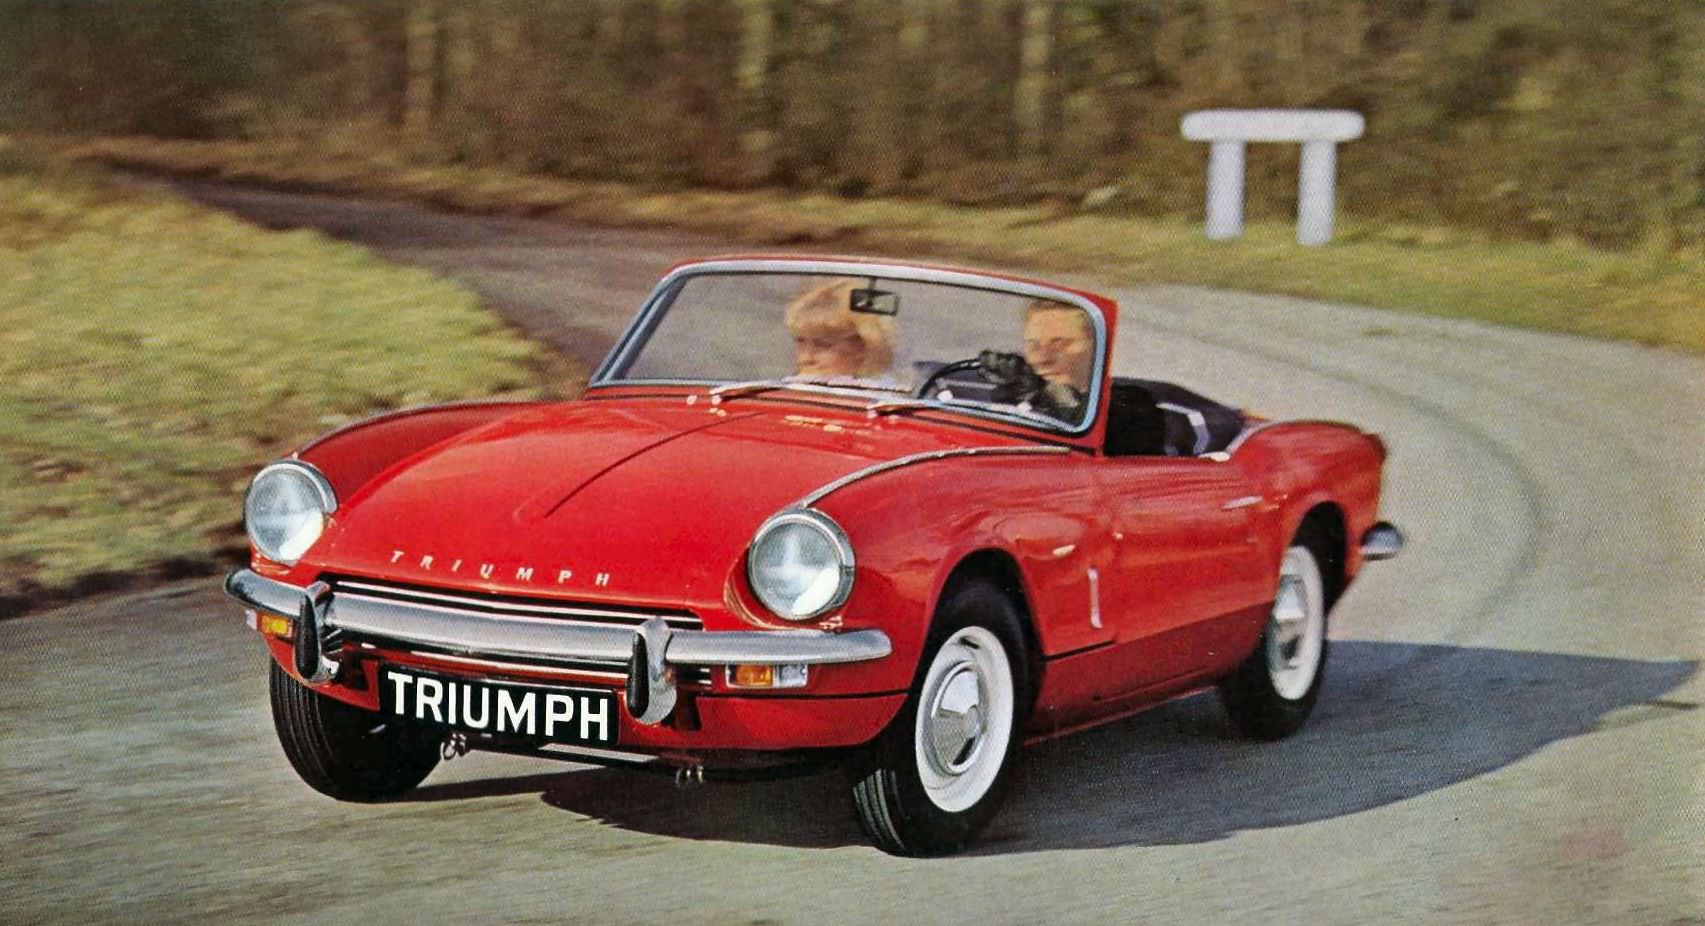 A Brief History of the Triumph Spitfire - Everything You Need To Know